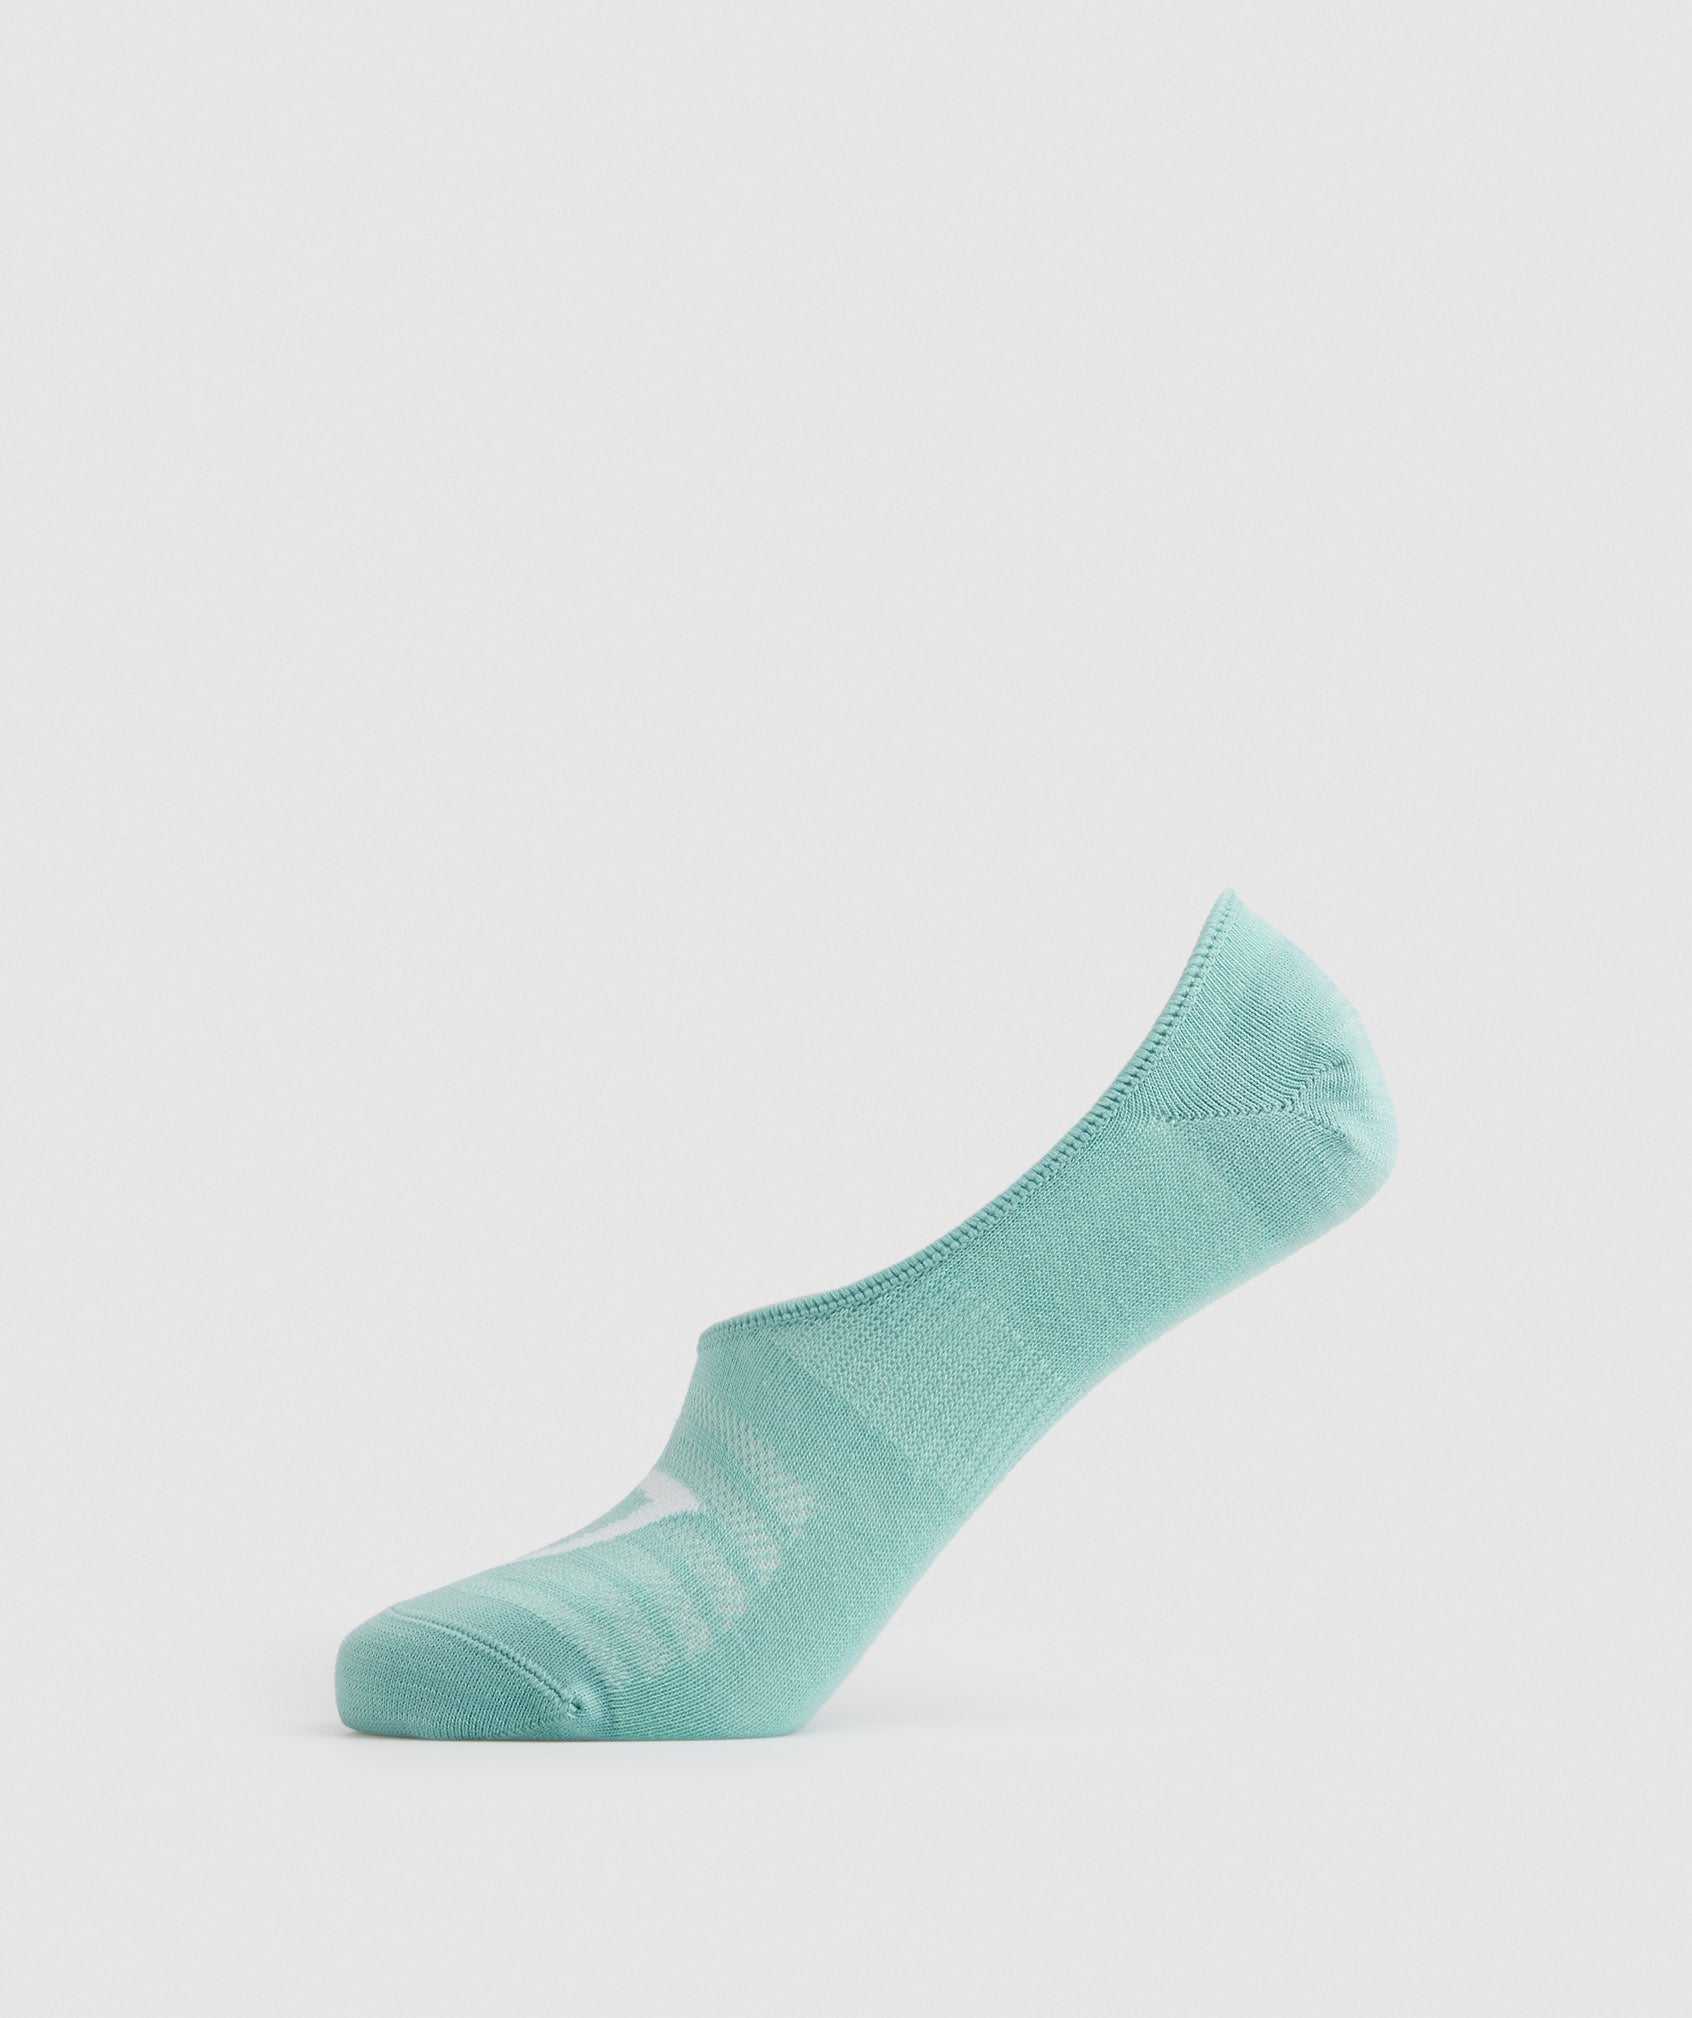 No Show Socks 3pk in Winter Teal/Pearl Blue/White - view 4